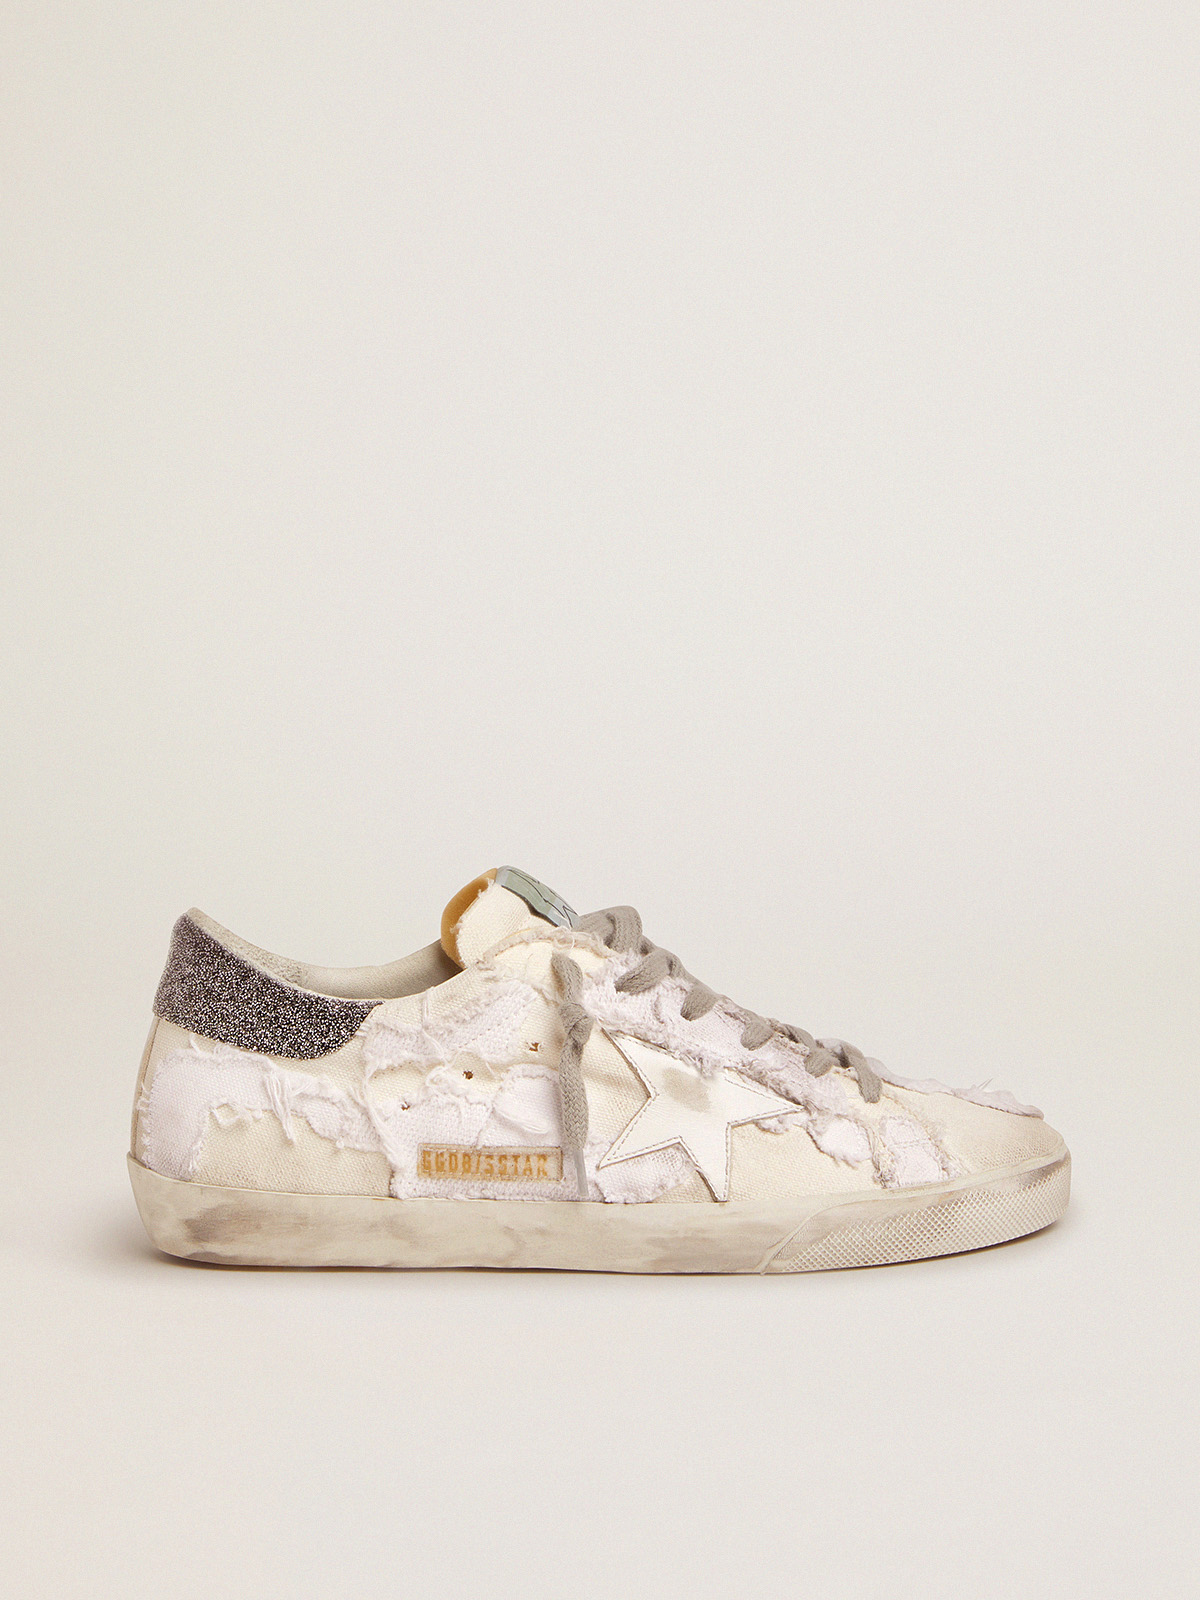 The most EXTRAORDINARY Sparkle You'll See SWAROVSKI #sneakers